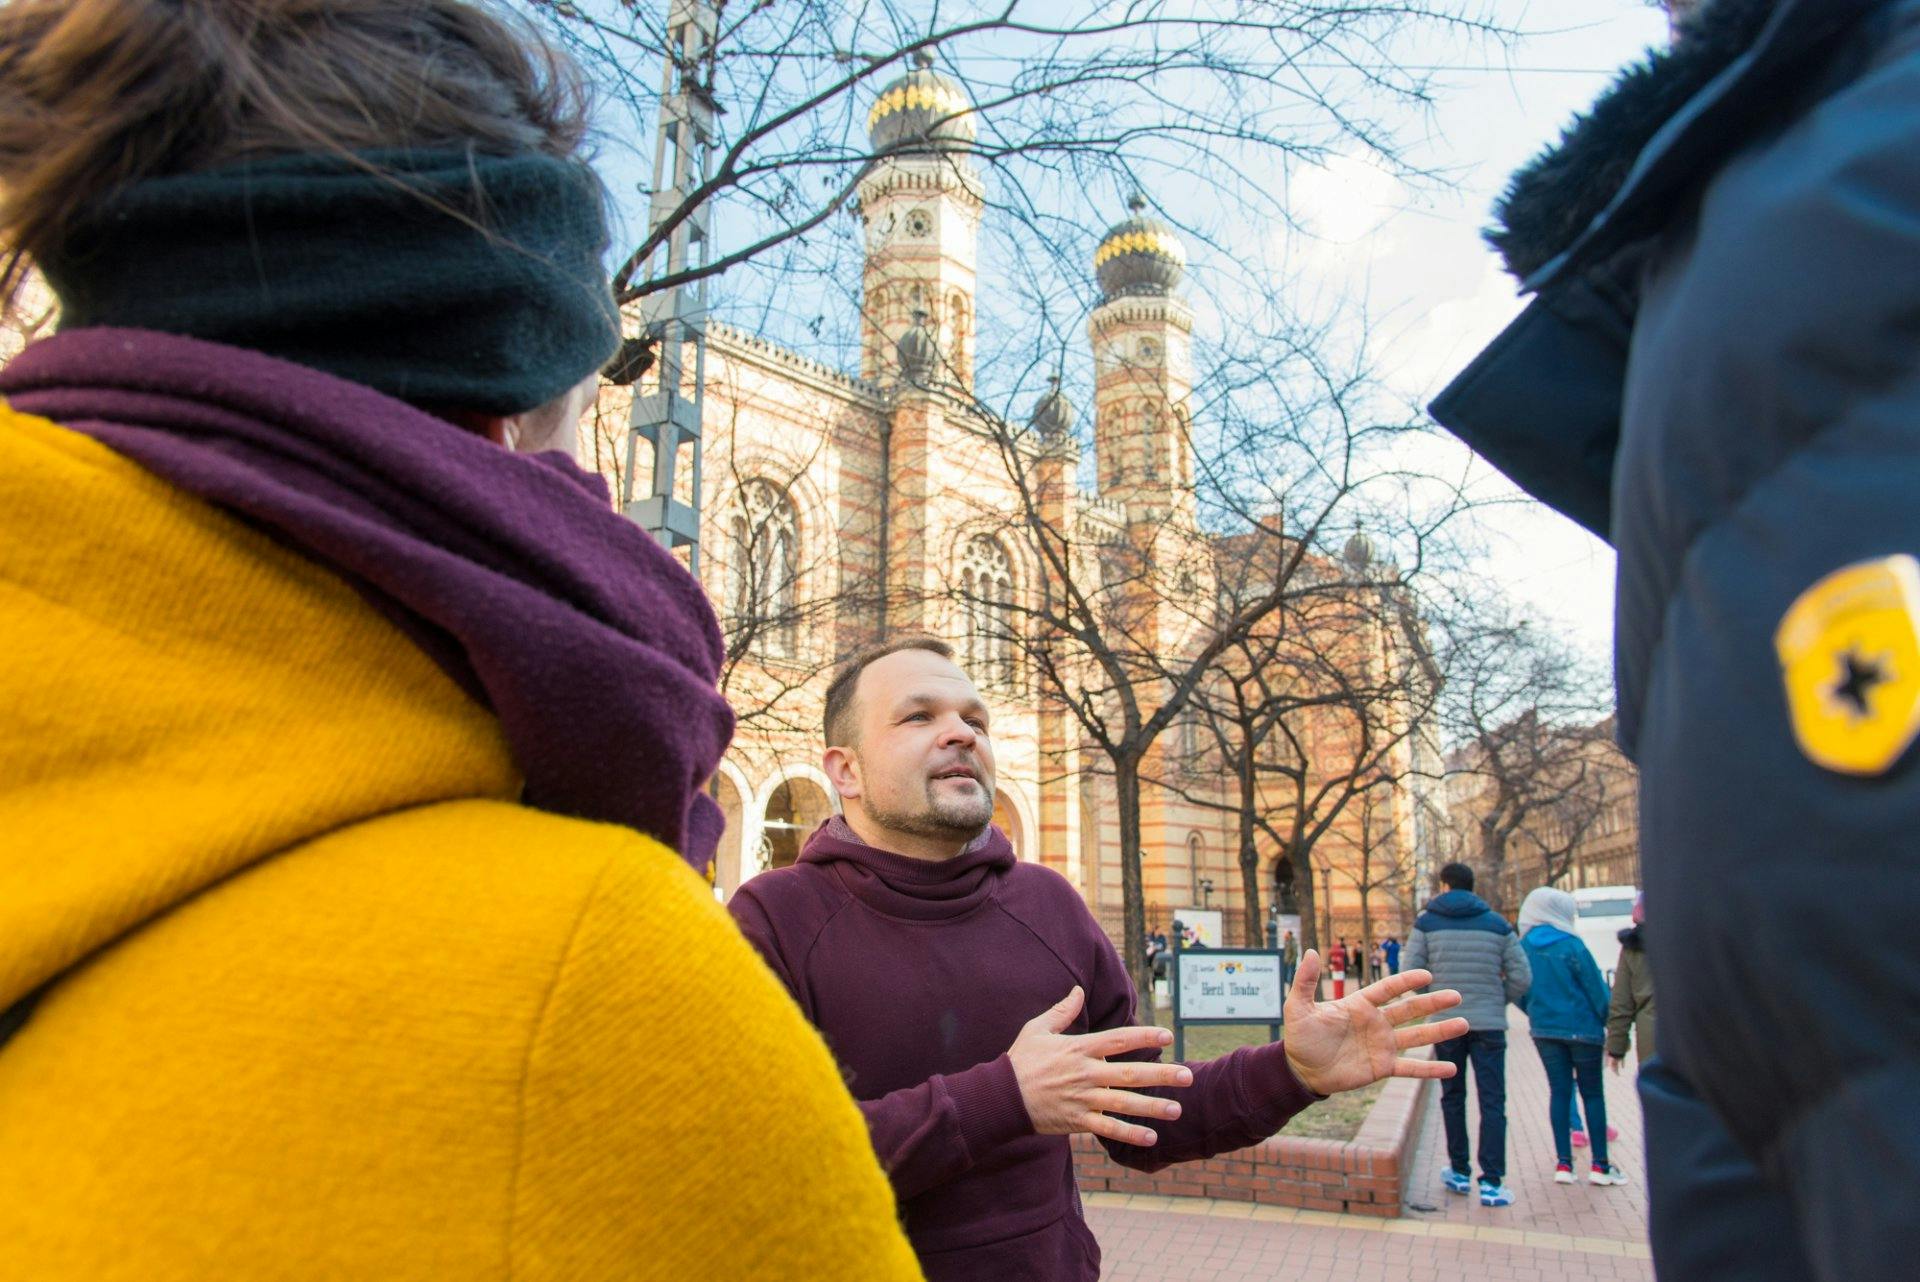 Jewish Budapest tour with a historian